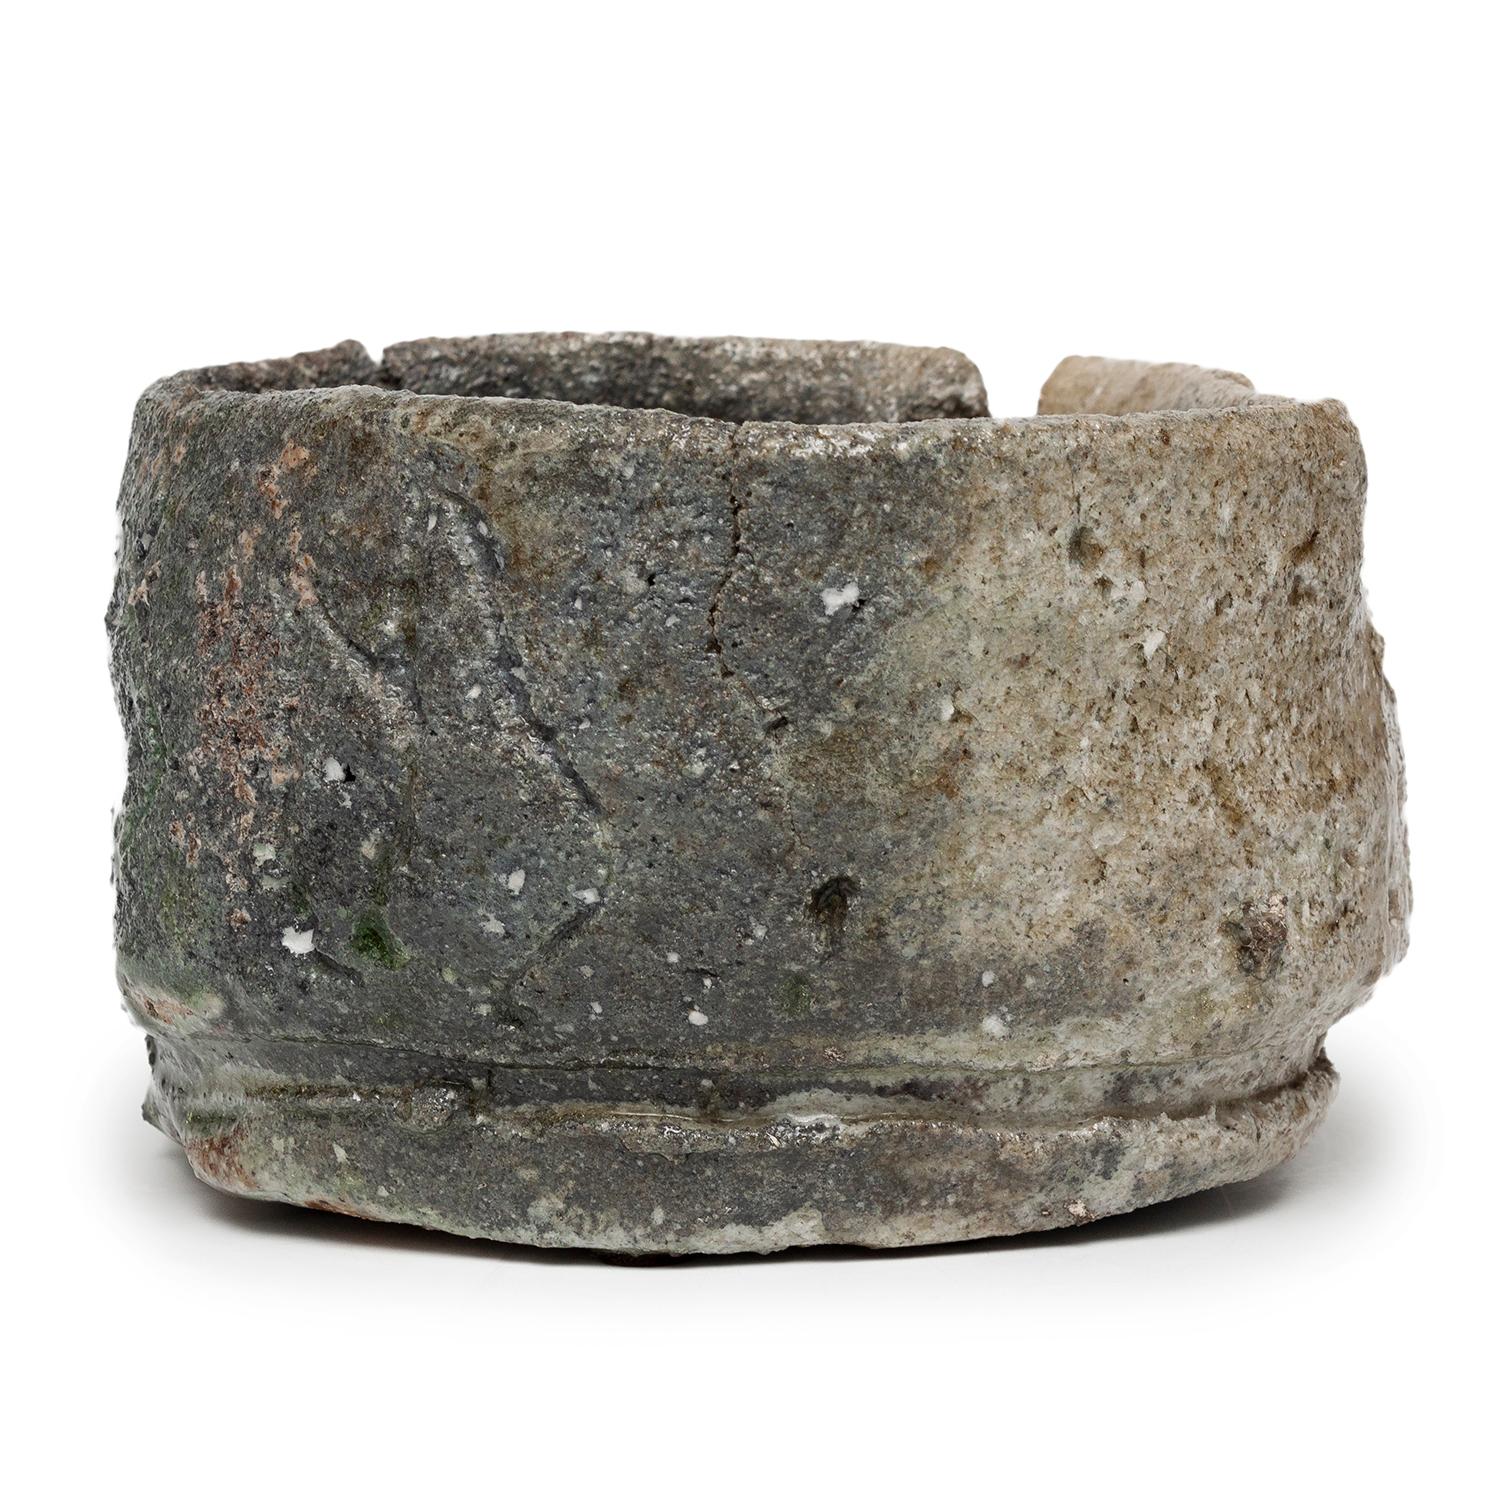 "Teabowl" by Peter Voulkos